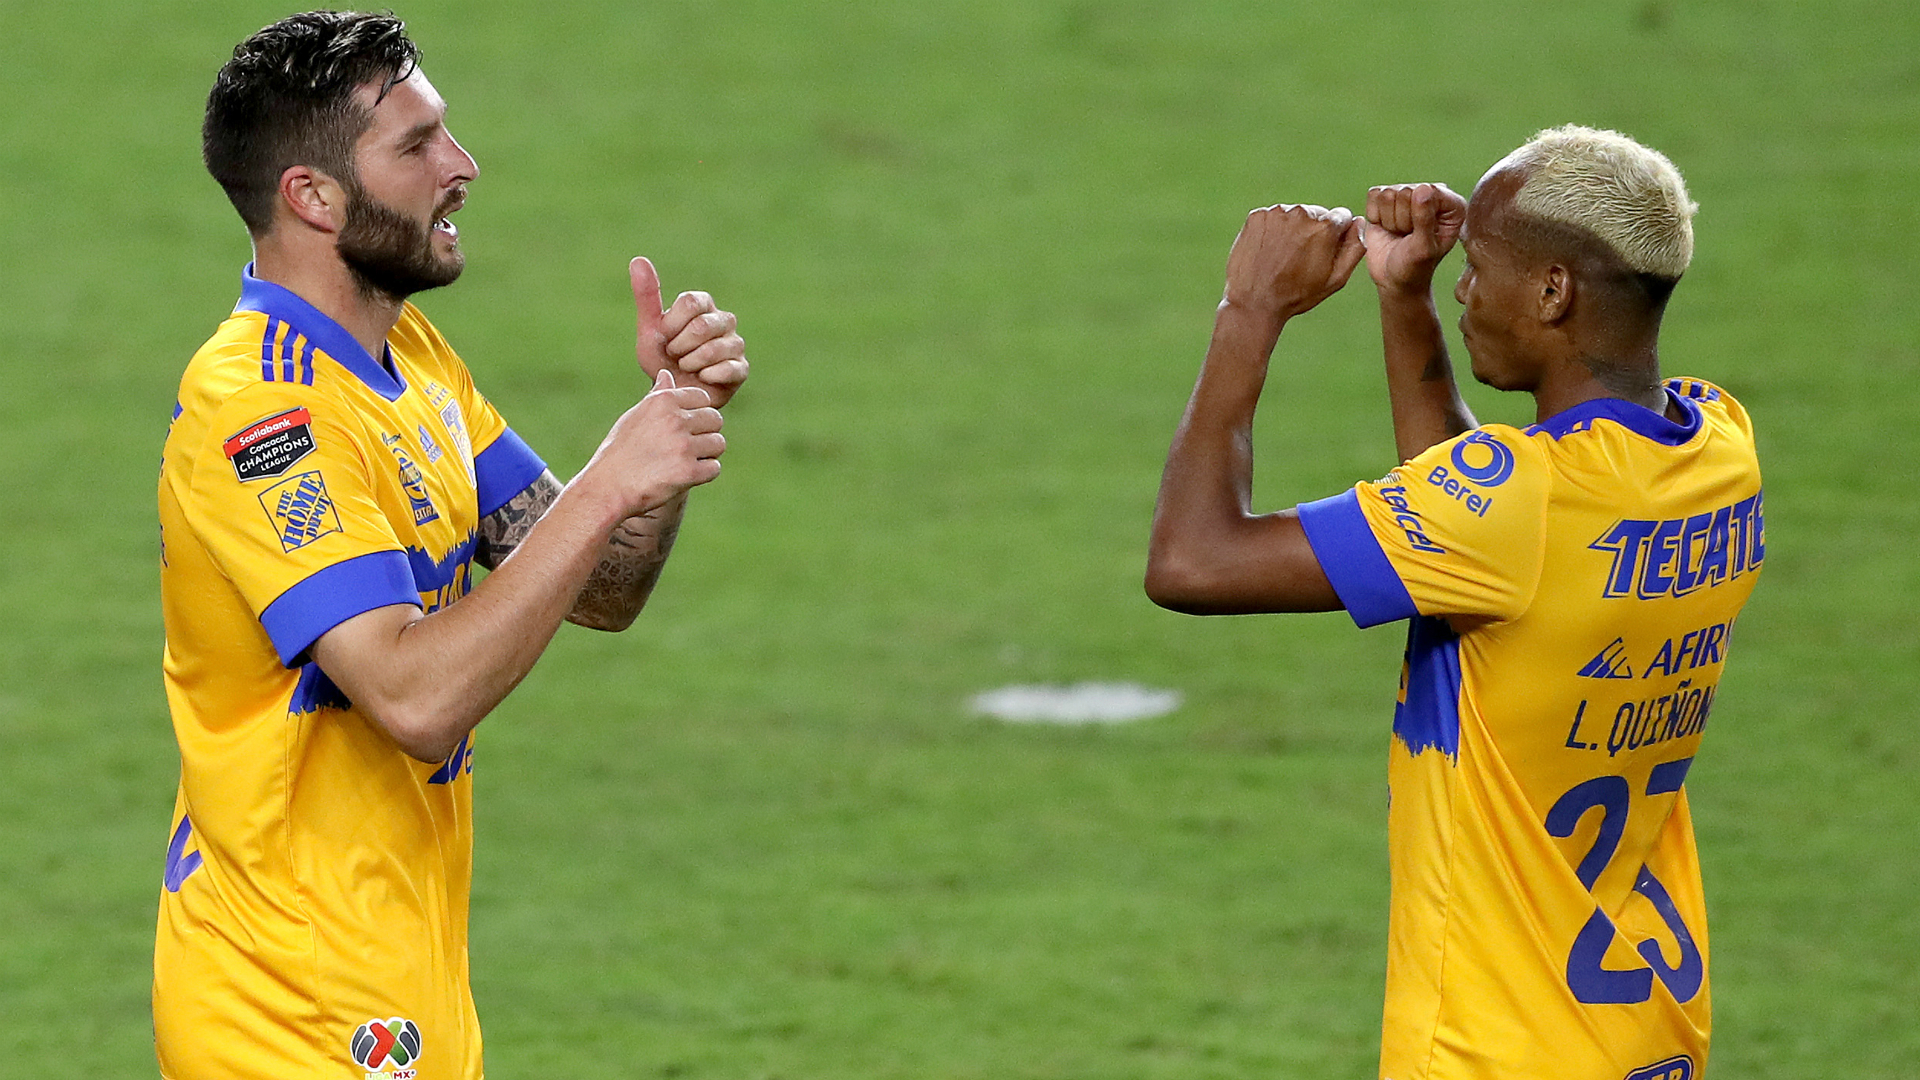 Tigres clinches CONCACAF Champions League title